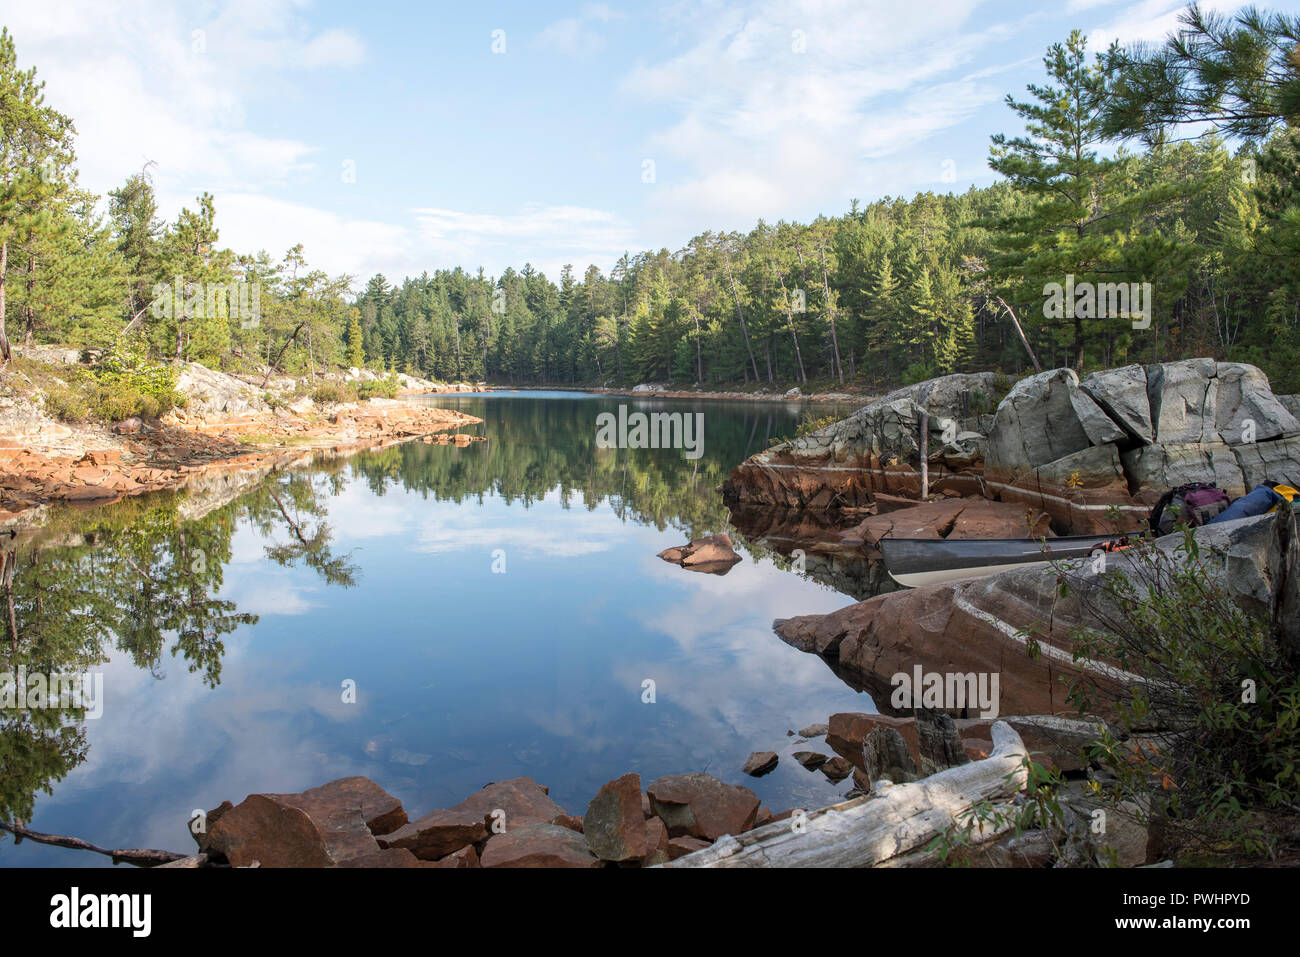 Morning view of The Still Waters of a Small Lake in Temagami, Ontario, Canada. The Beauty of the Canadian Shield. Stock Photo